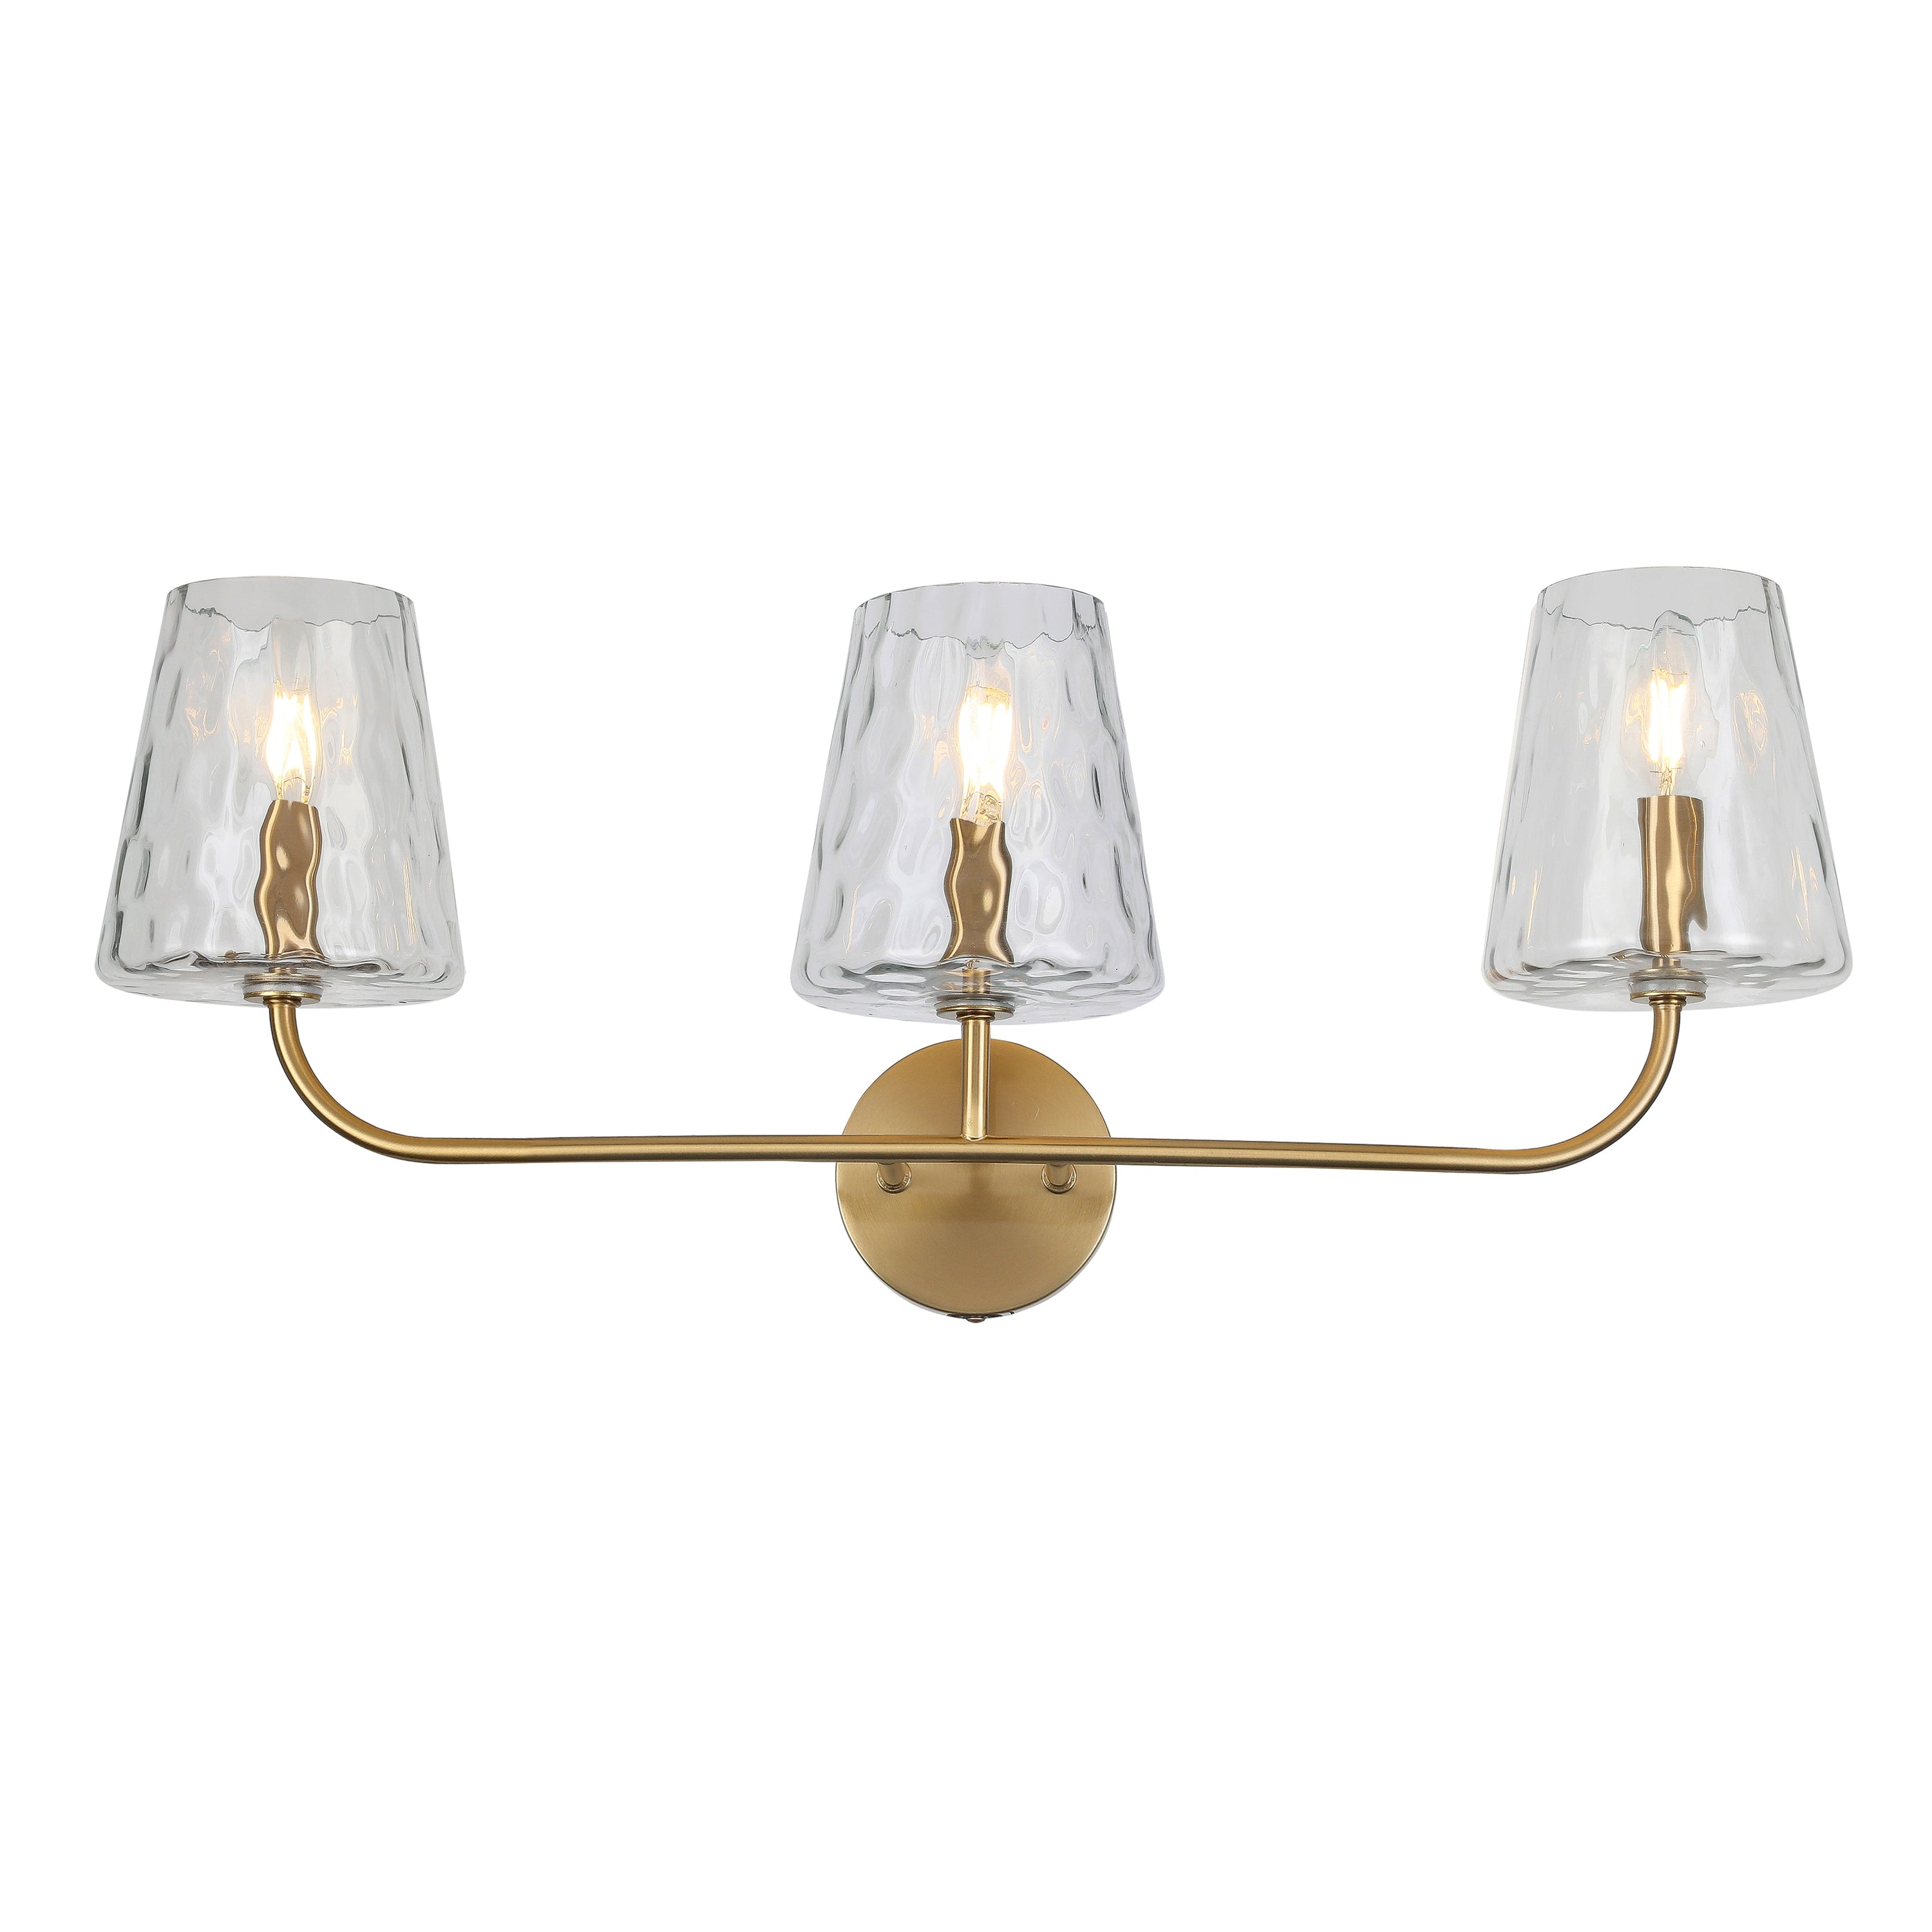 Dainolite Eleanor - ELN-213W-AGB-CLR - 3 Light Vanity Fixture Aged Brass with Clear Hammered Glass - Aged Brass